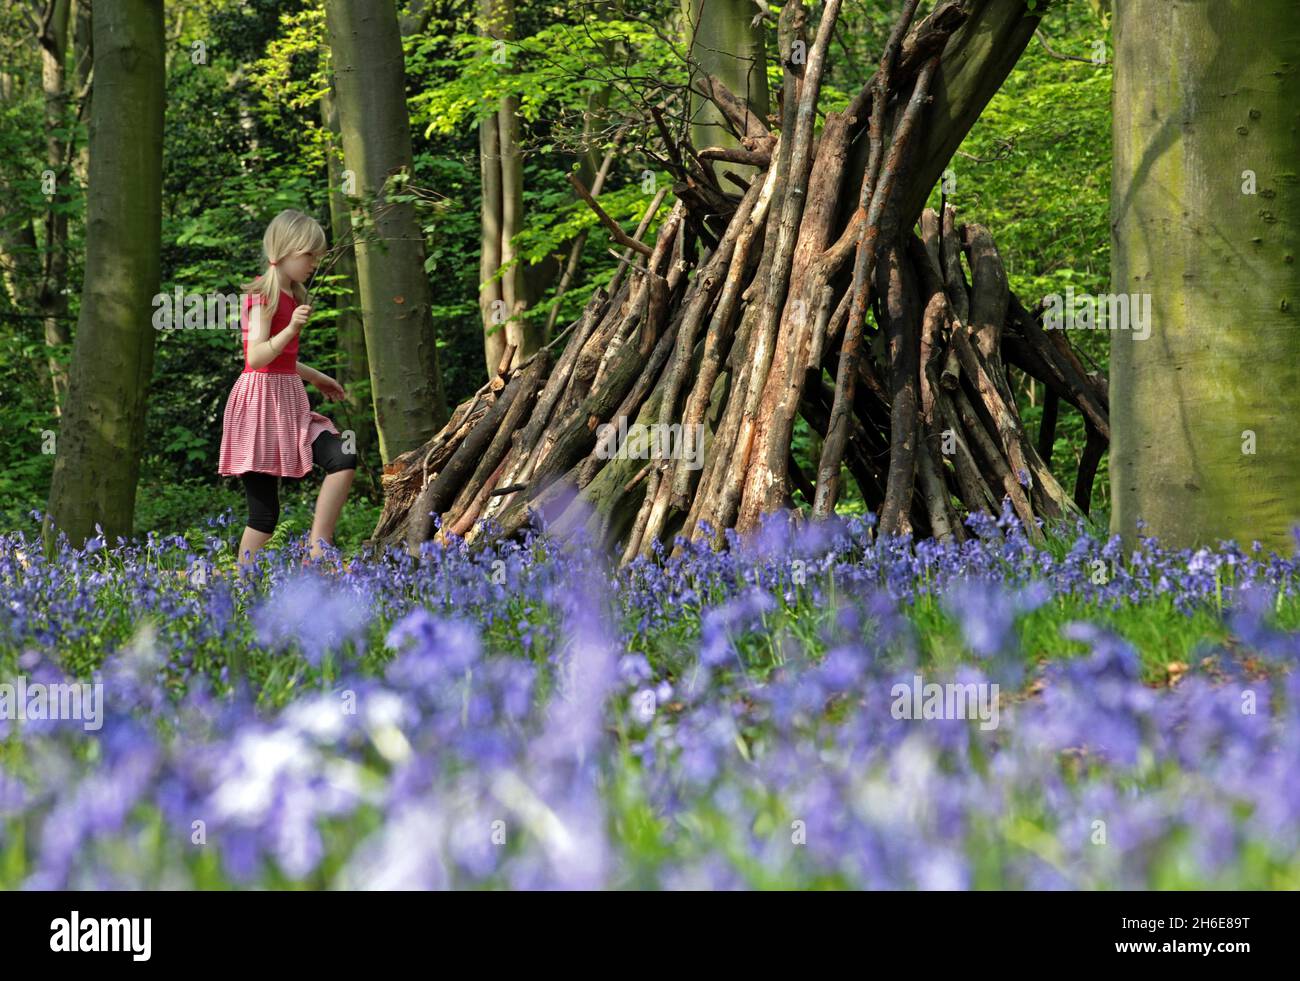 11 year old Jess makes the most of her Easter holiday by playing in the bluebells in Wanstead Park in East London. The amazing display of bluebells have come early this year due to the warm weather. Stock Photo